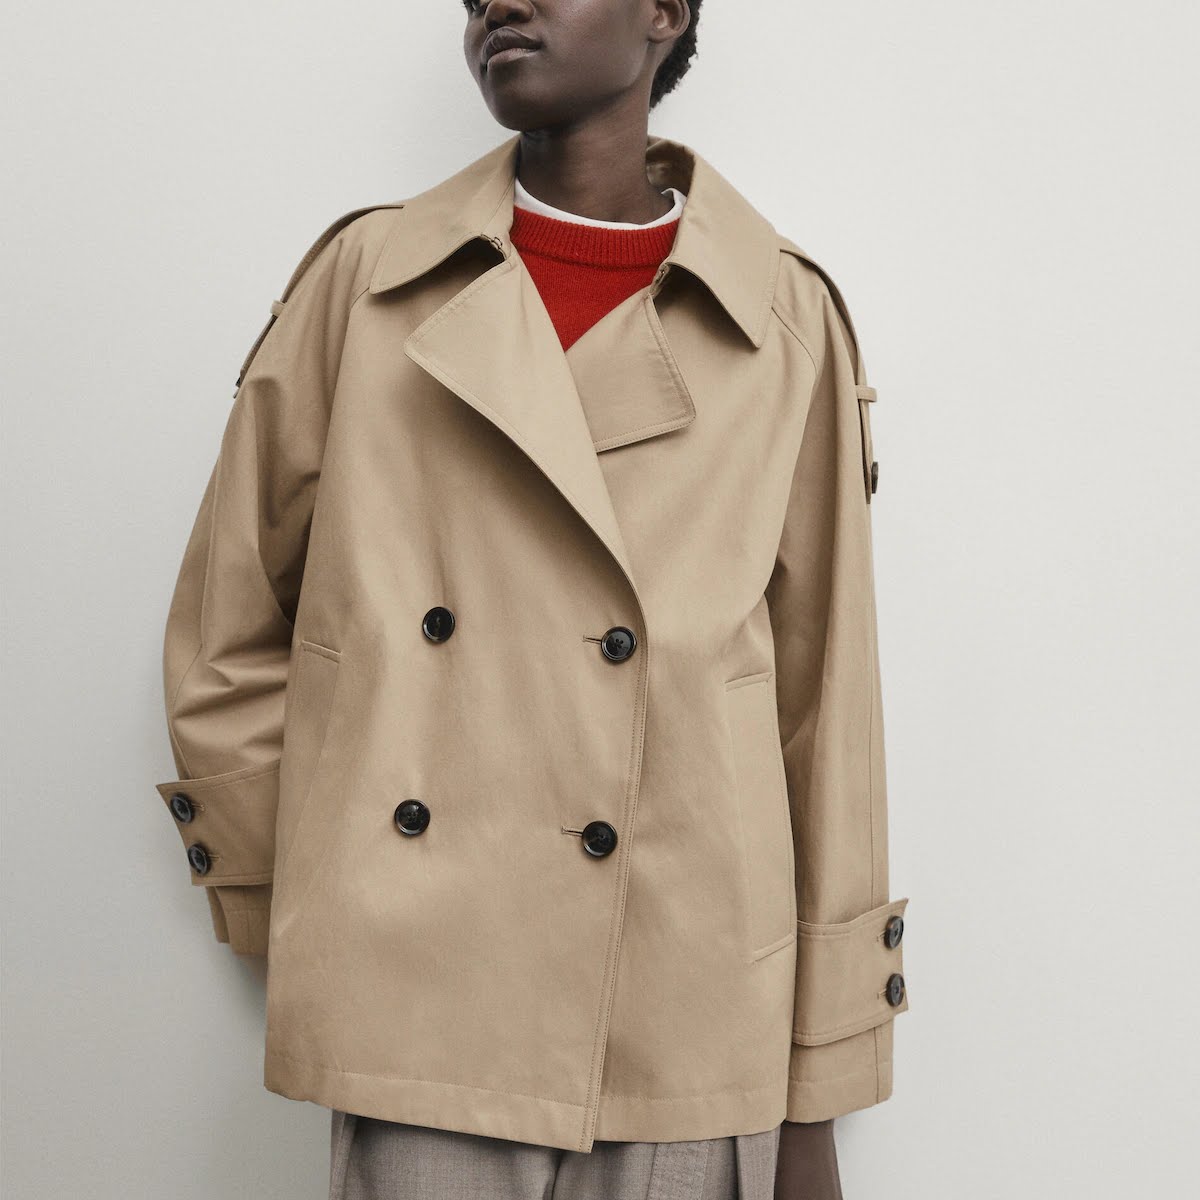 Massimo Dutti Cropped Trench, €149